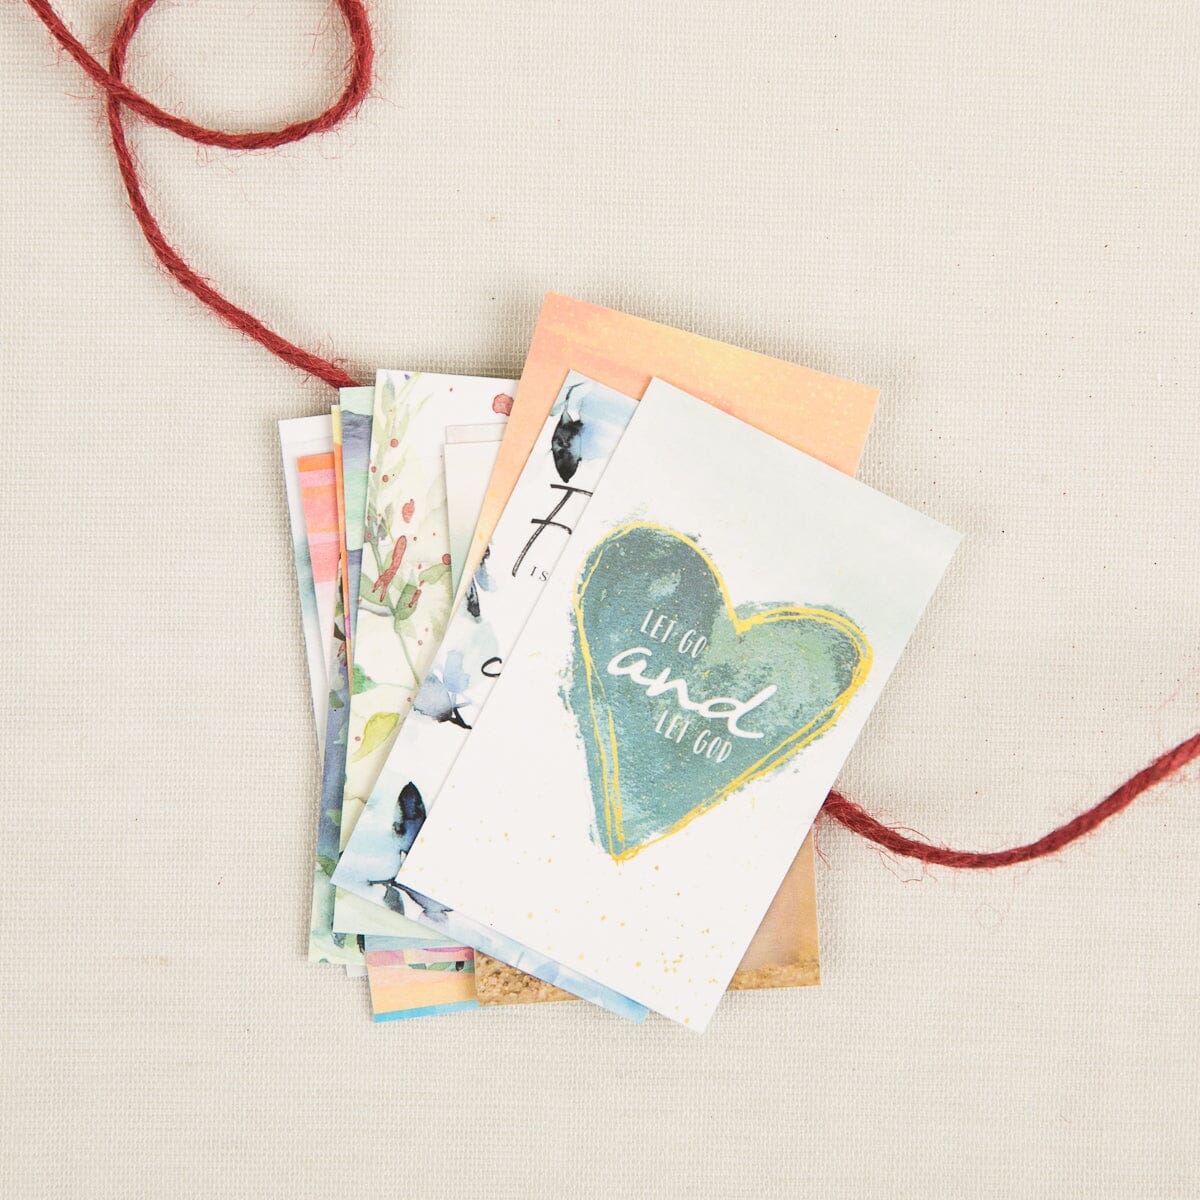 12 Note Cards to Share